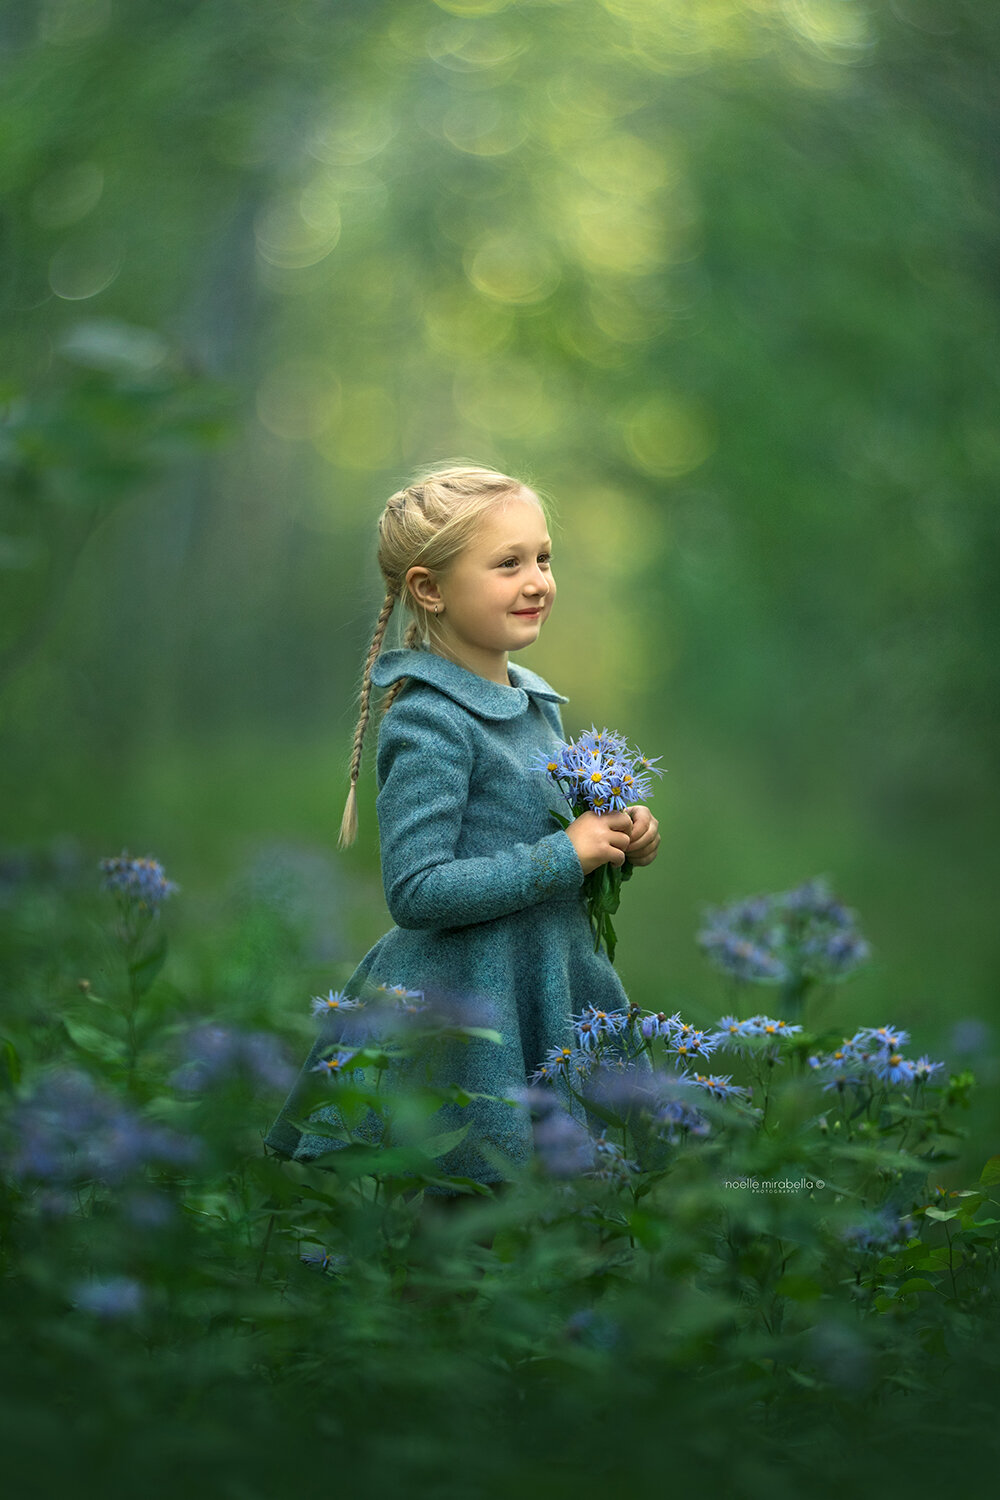 Girl in a blue wool dress holding bliue flowers, surrounded by a flower garden.